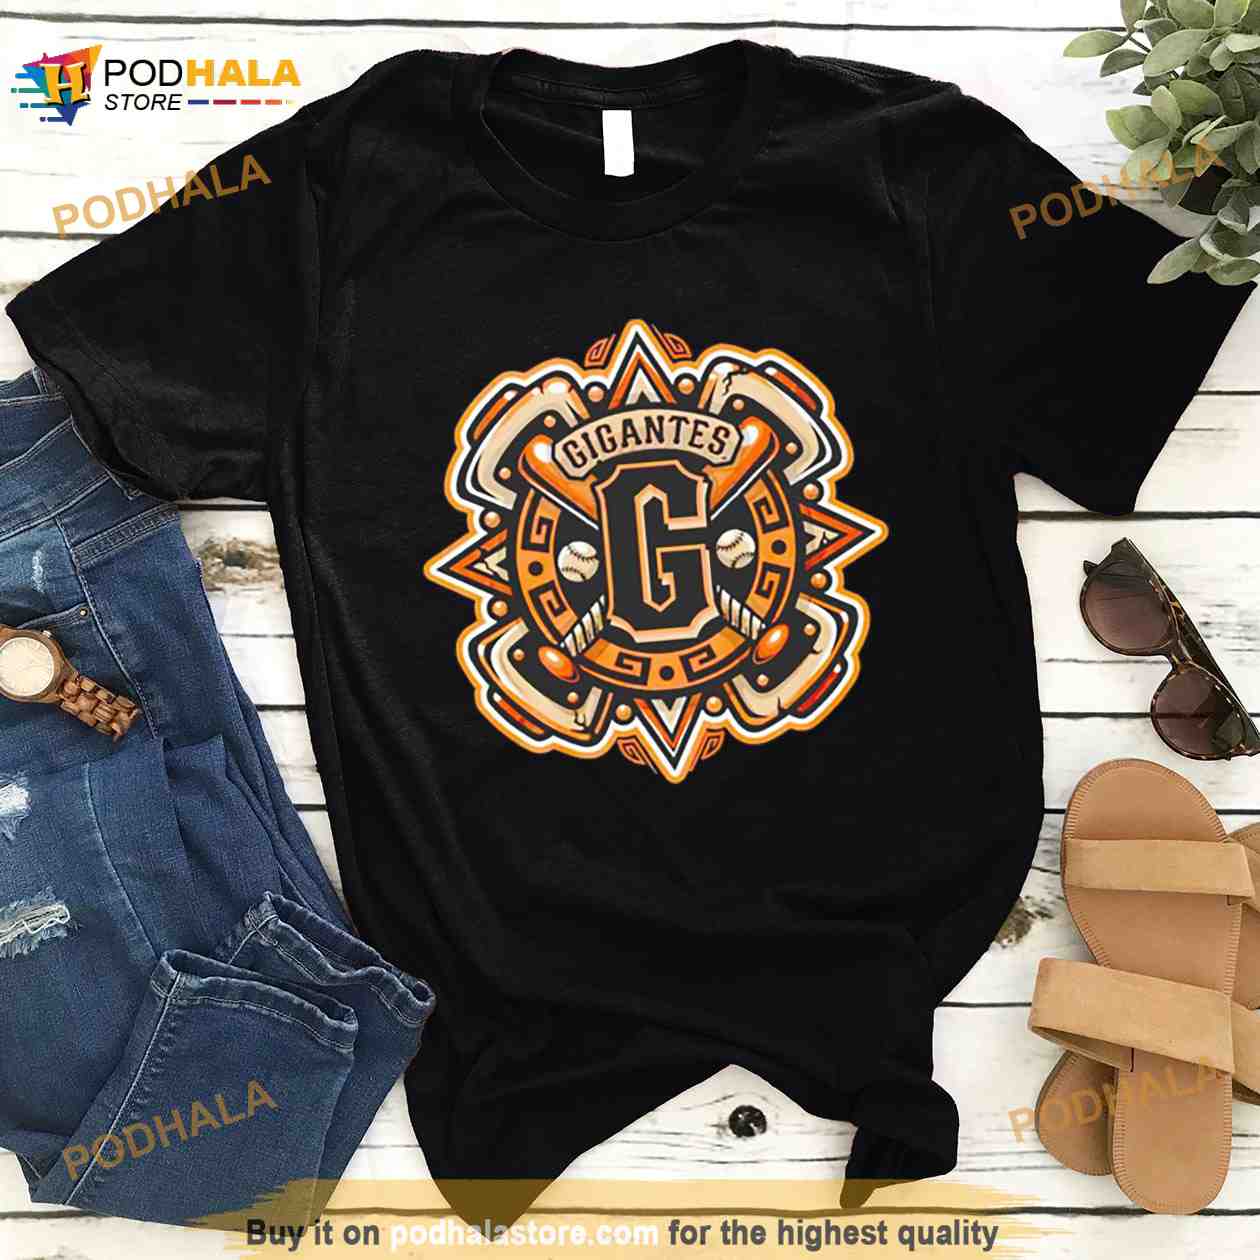 SF Giants Gigantes Shirt - Bring Your Ideas, Thoughts And Imaginations Into  Reality Today